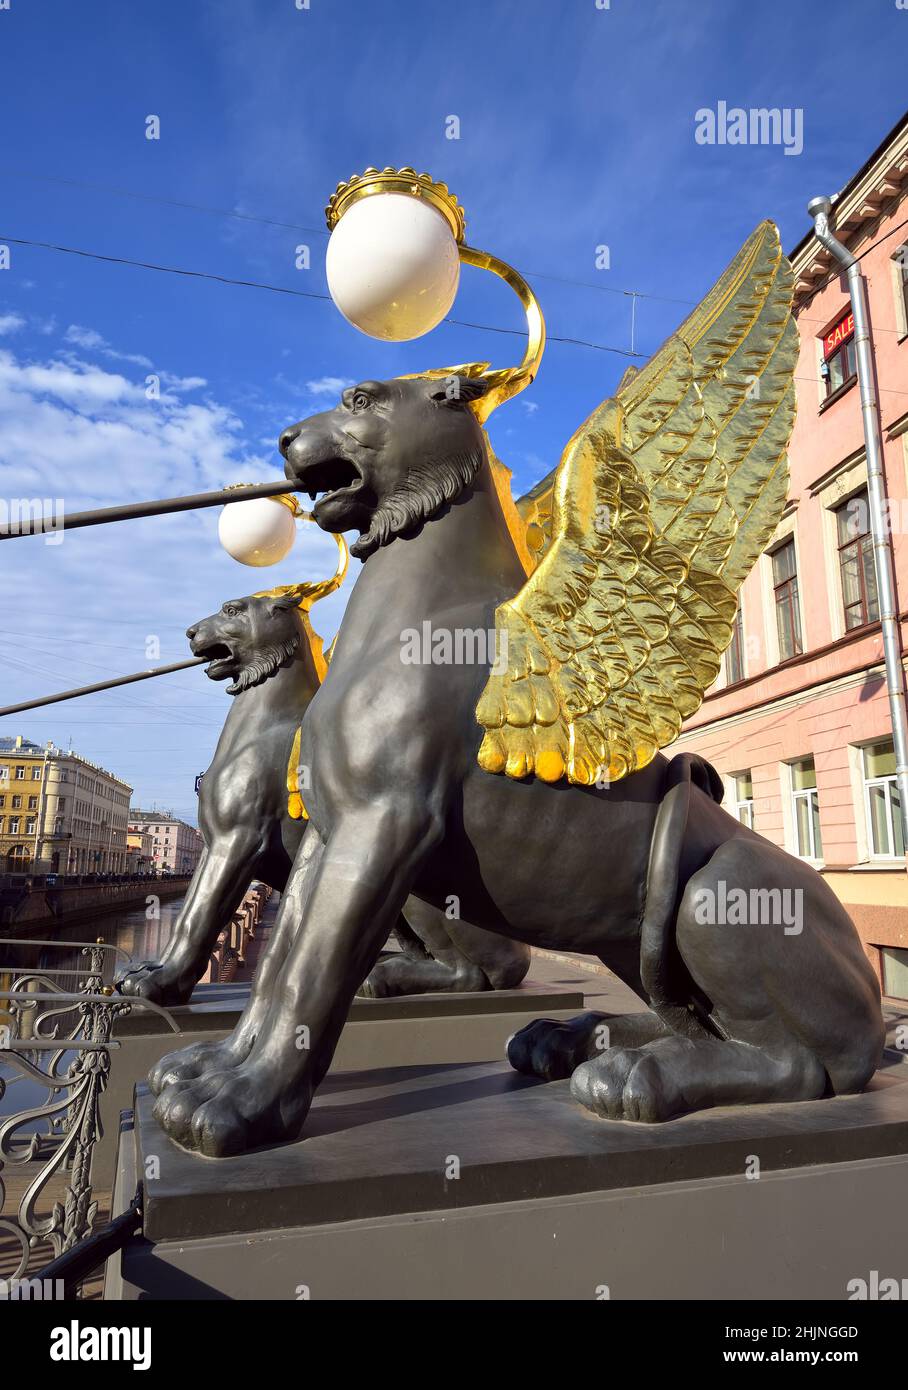 Gryphons of the Bank bridge on the Griboyedov canal. Two sculptures of mythical creatures with Golden wings hold a pedestrian bridge. Art of the XIX c Stock Photo